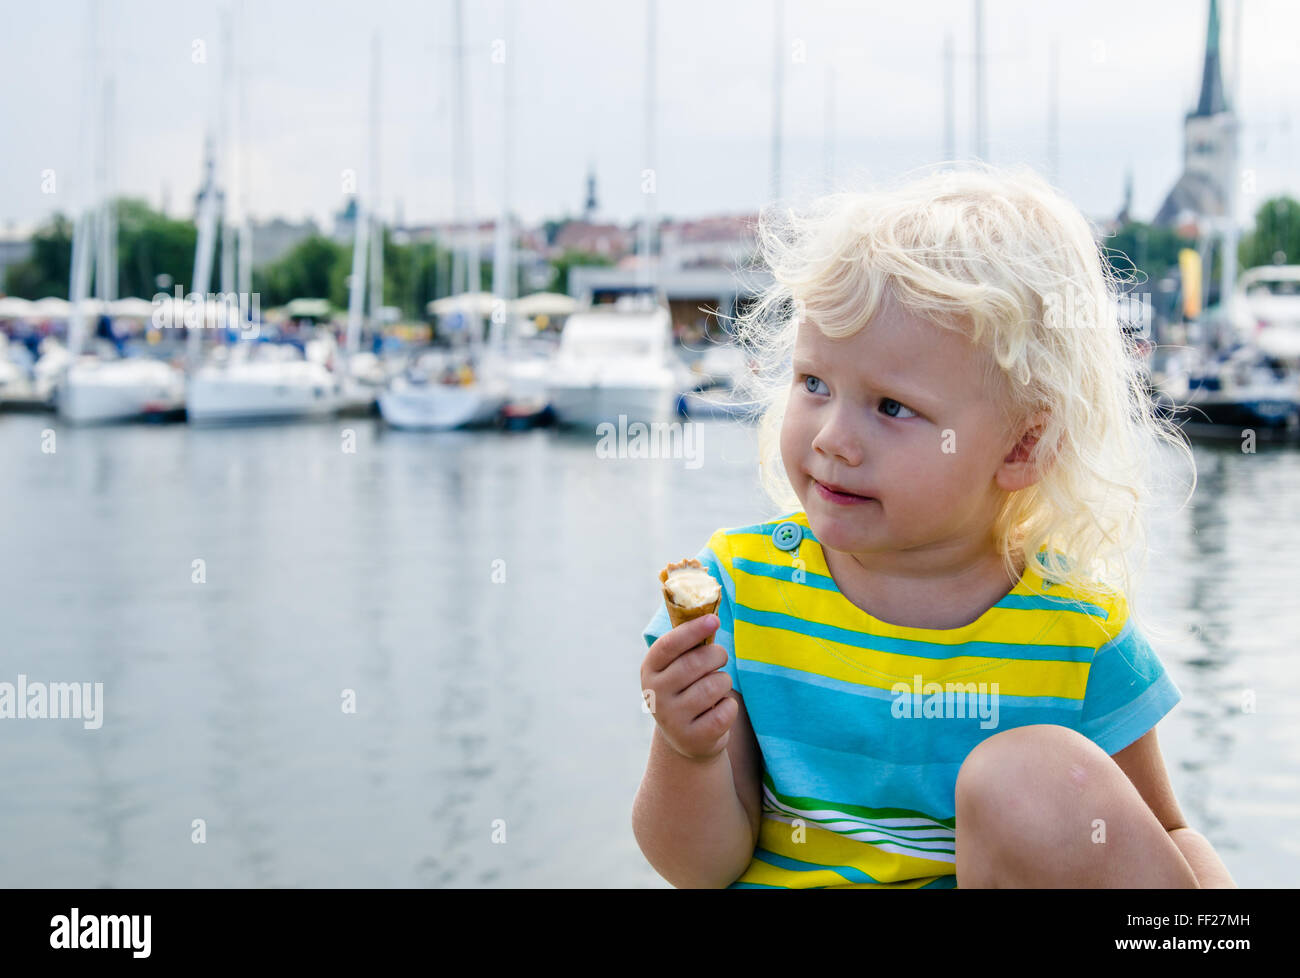 Little girl eating ice cream on a background of harbor Stock Photo